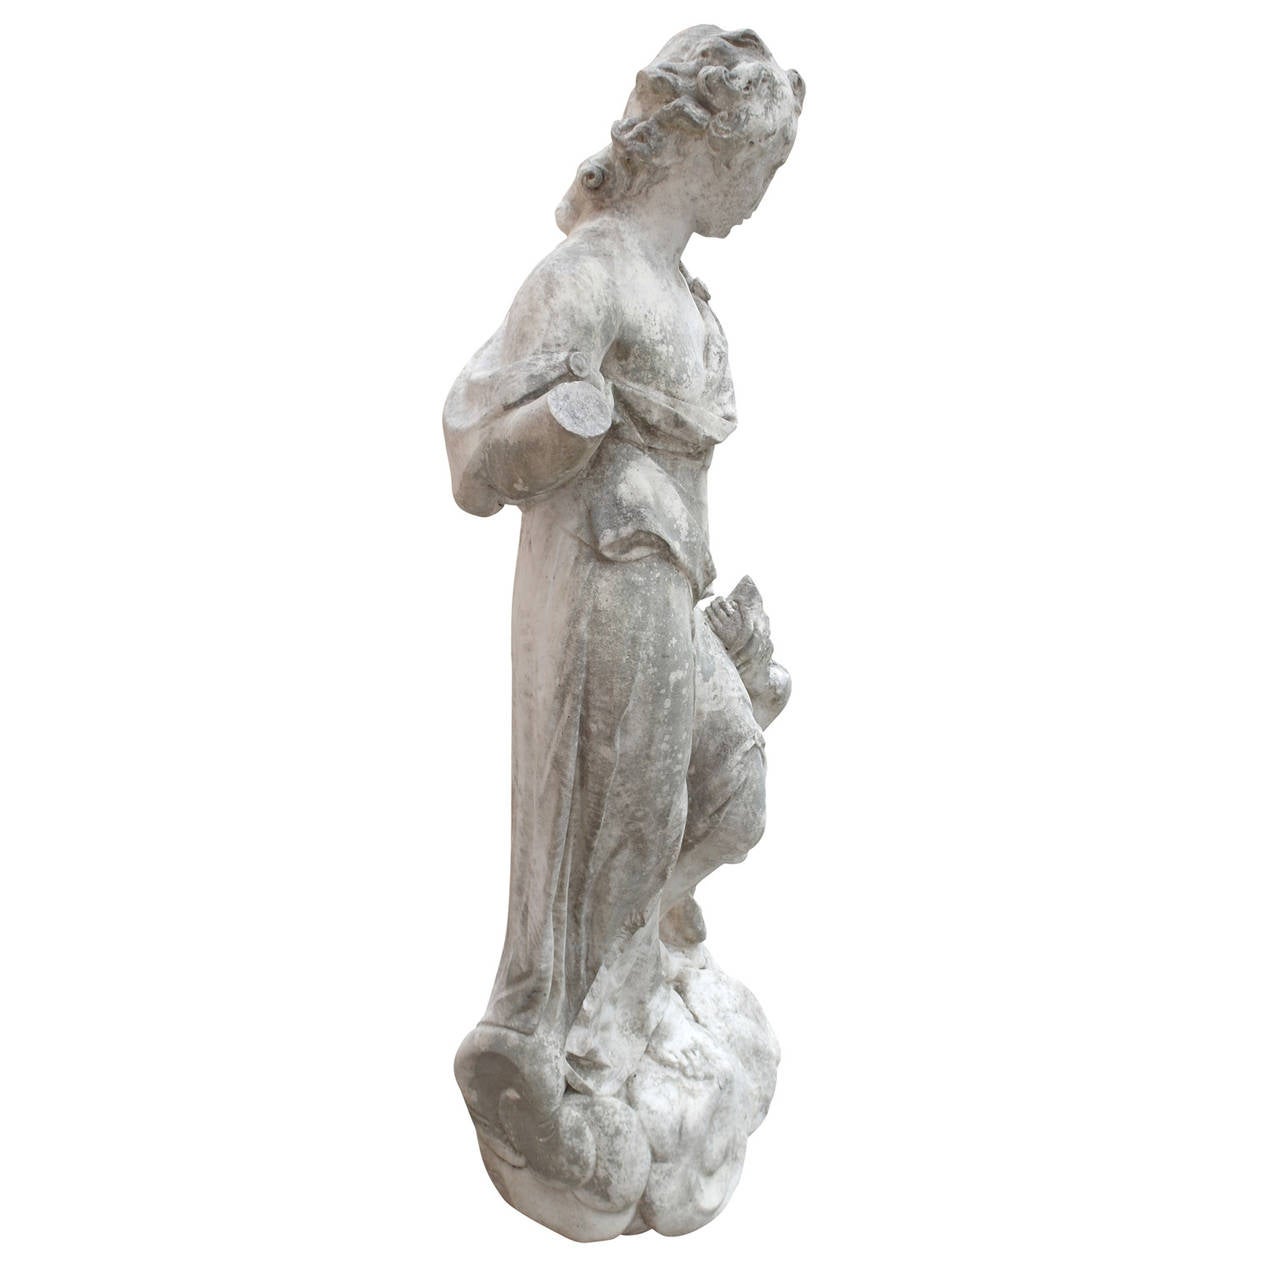 The female statue lost both her arms and her head is slightly weathered. Her Body is wrapped in a thin cloth that follows her contours. Next to her is the body of a small Putto without his head, recognisable due to the remaining roots of his wings.